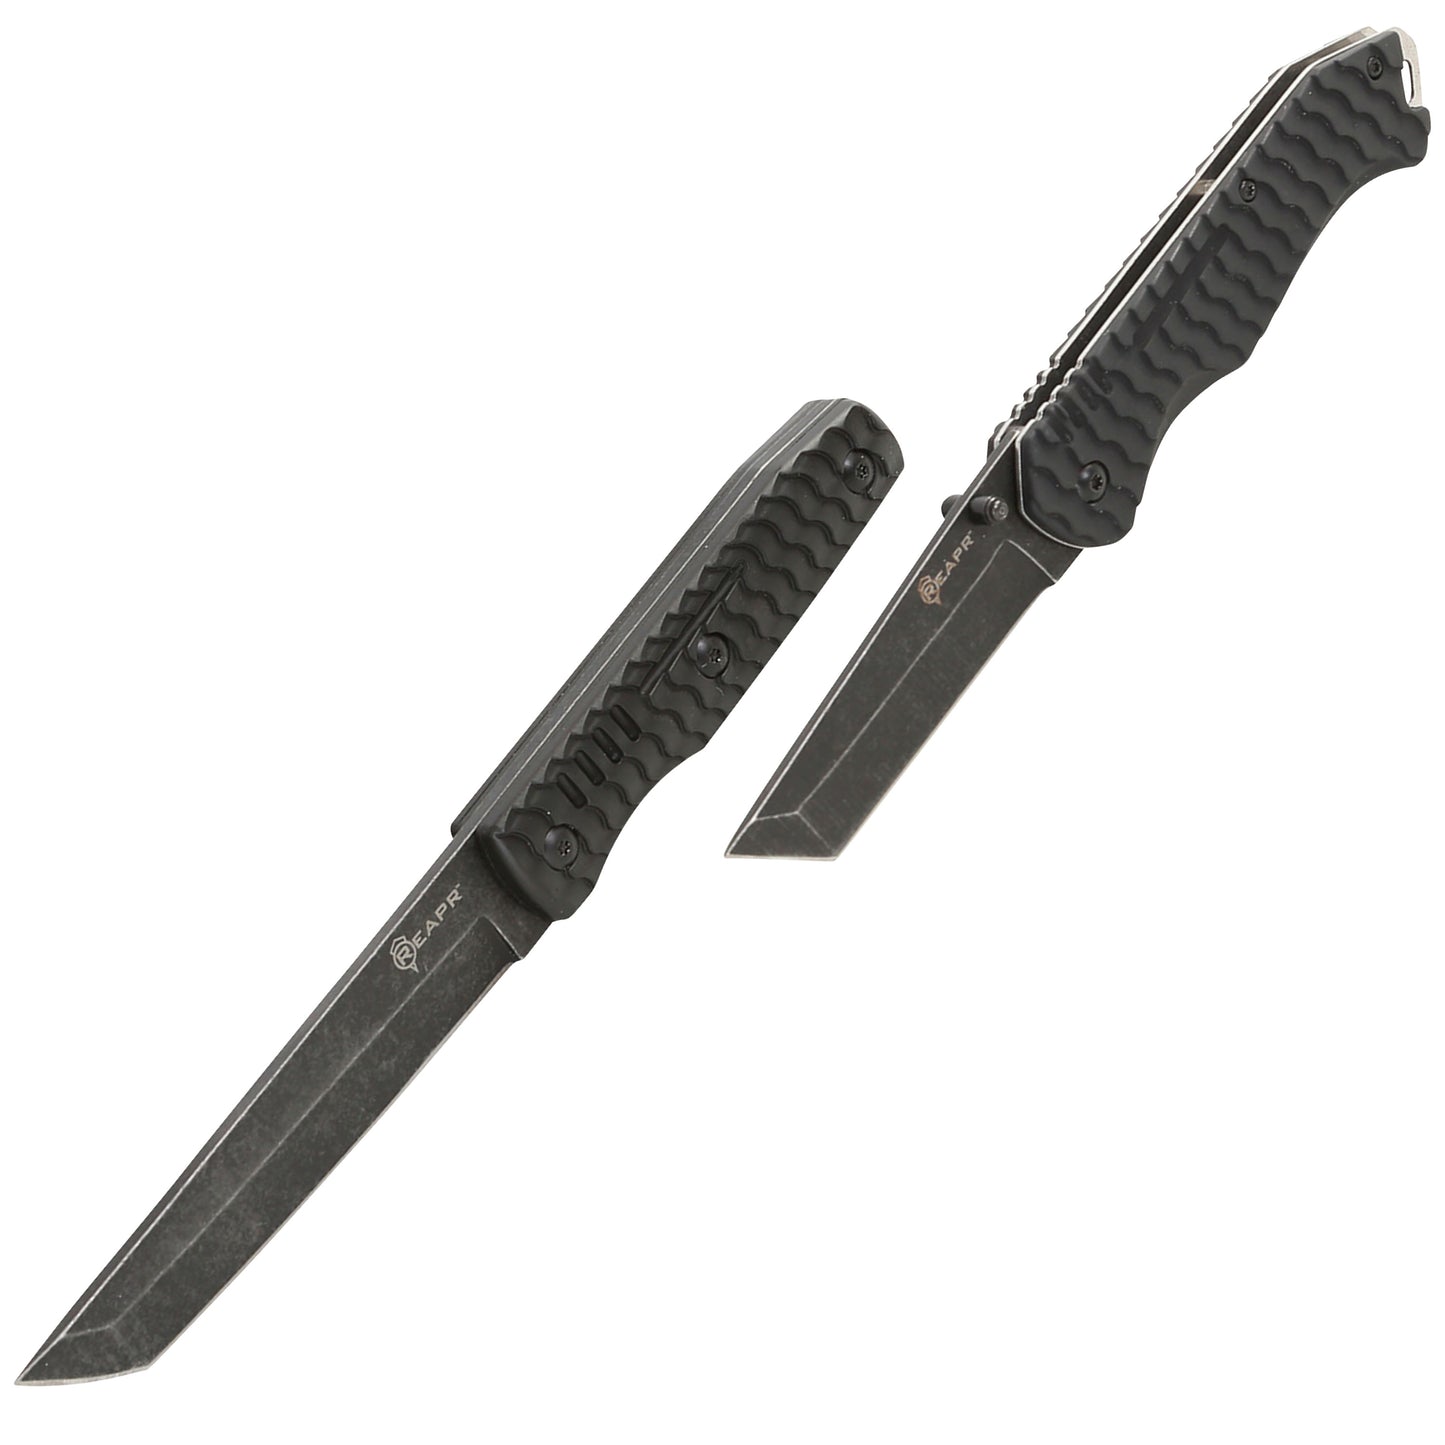 REAPR 11008 TAC Knife Tanto Set, 2 piece knife set durable points and sharp cutting edges